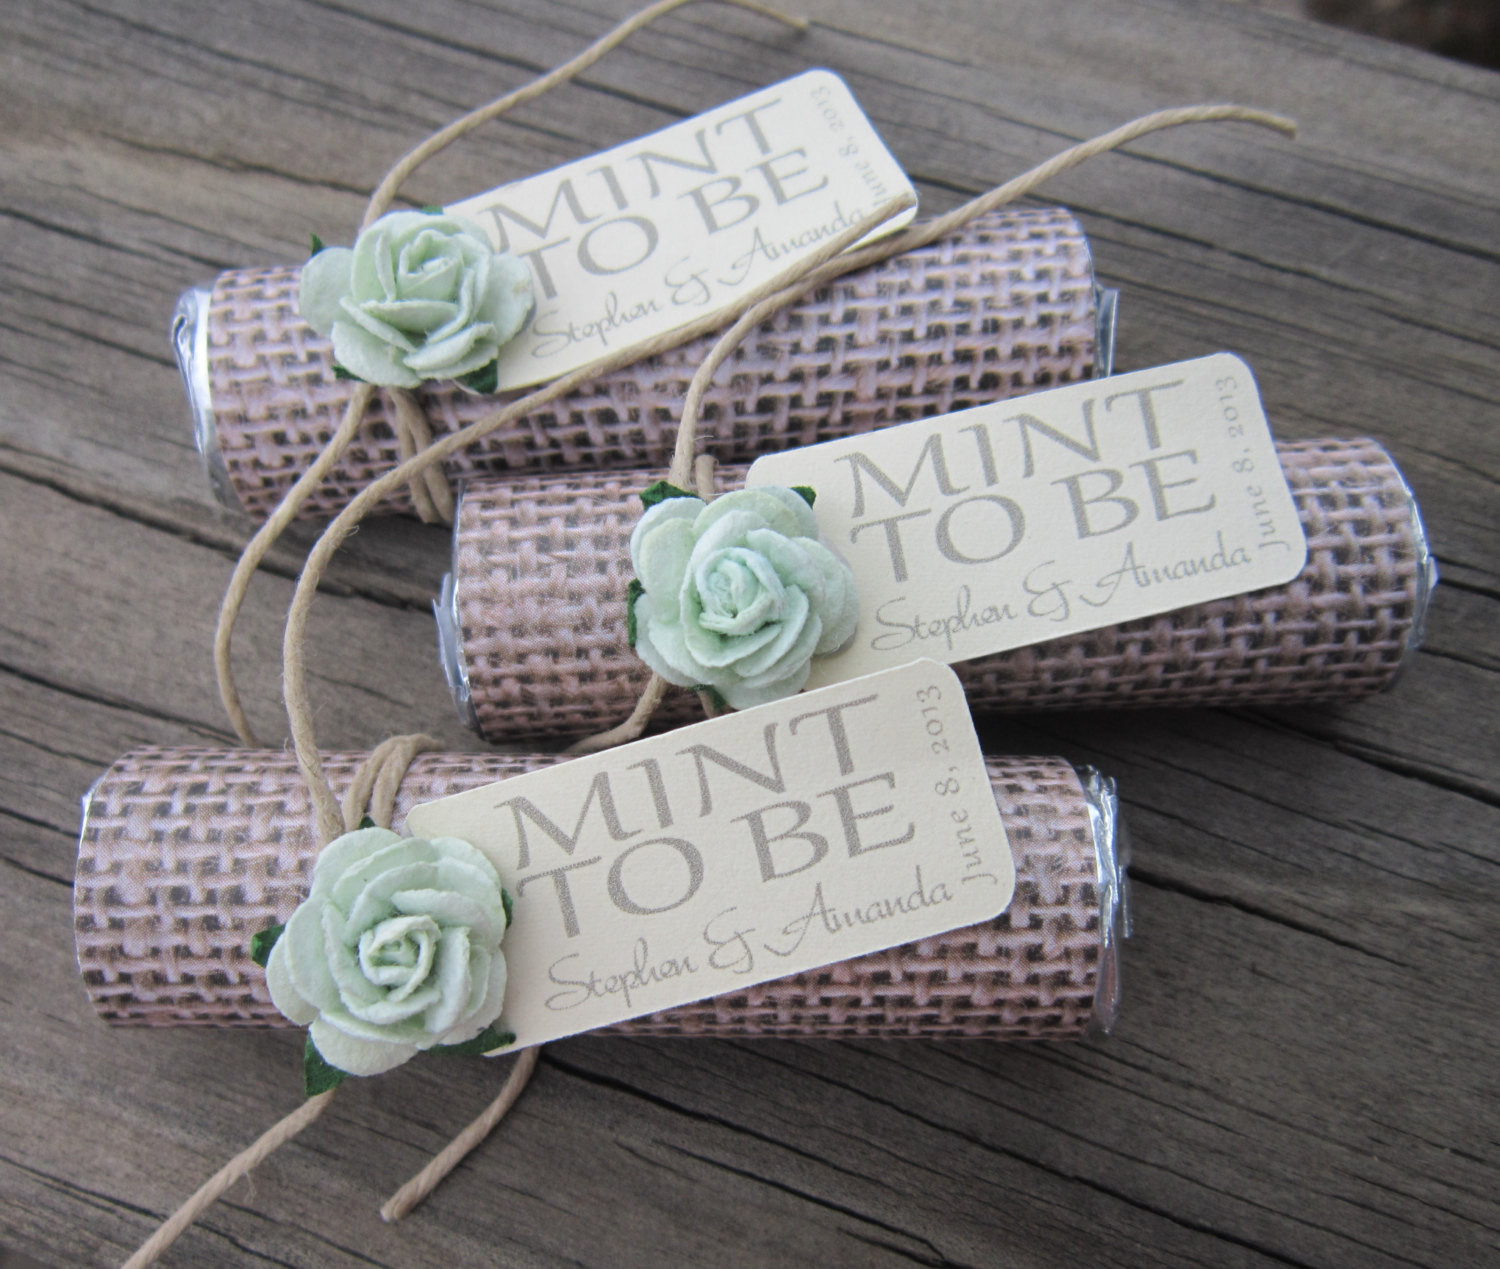 Mint To Be Wedding Favors DIY
 Say “I Do” to These Fab 51 Rustic Wedding Decorations